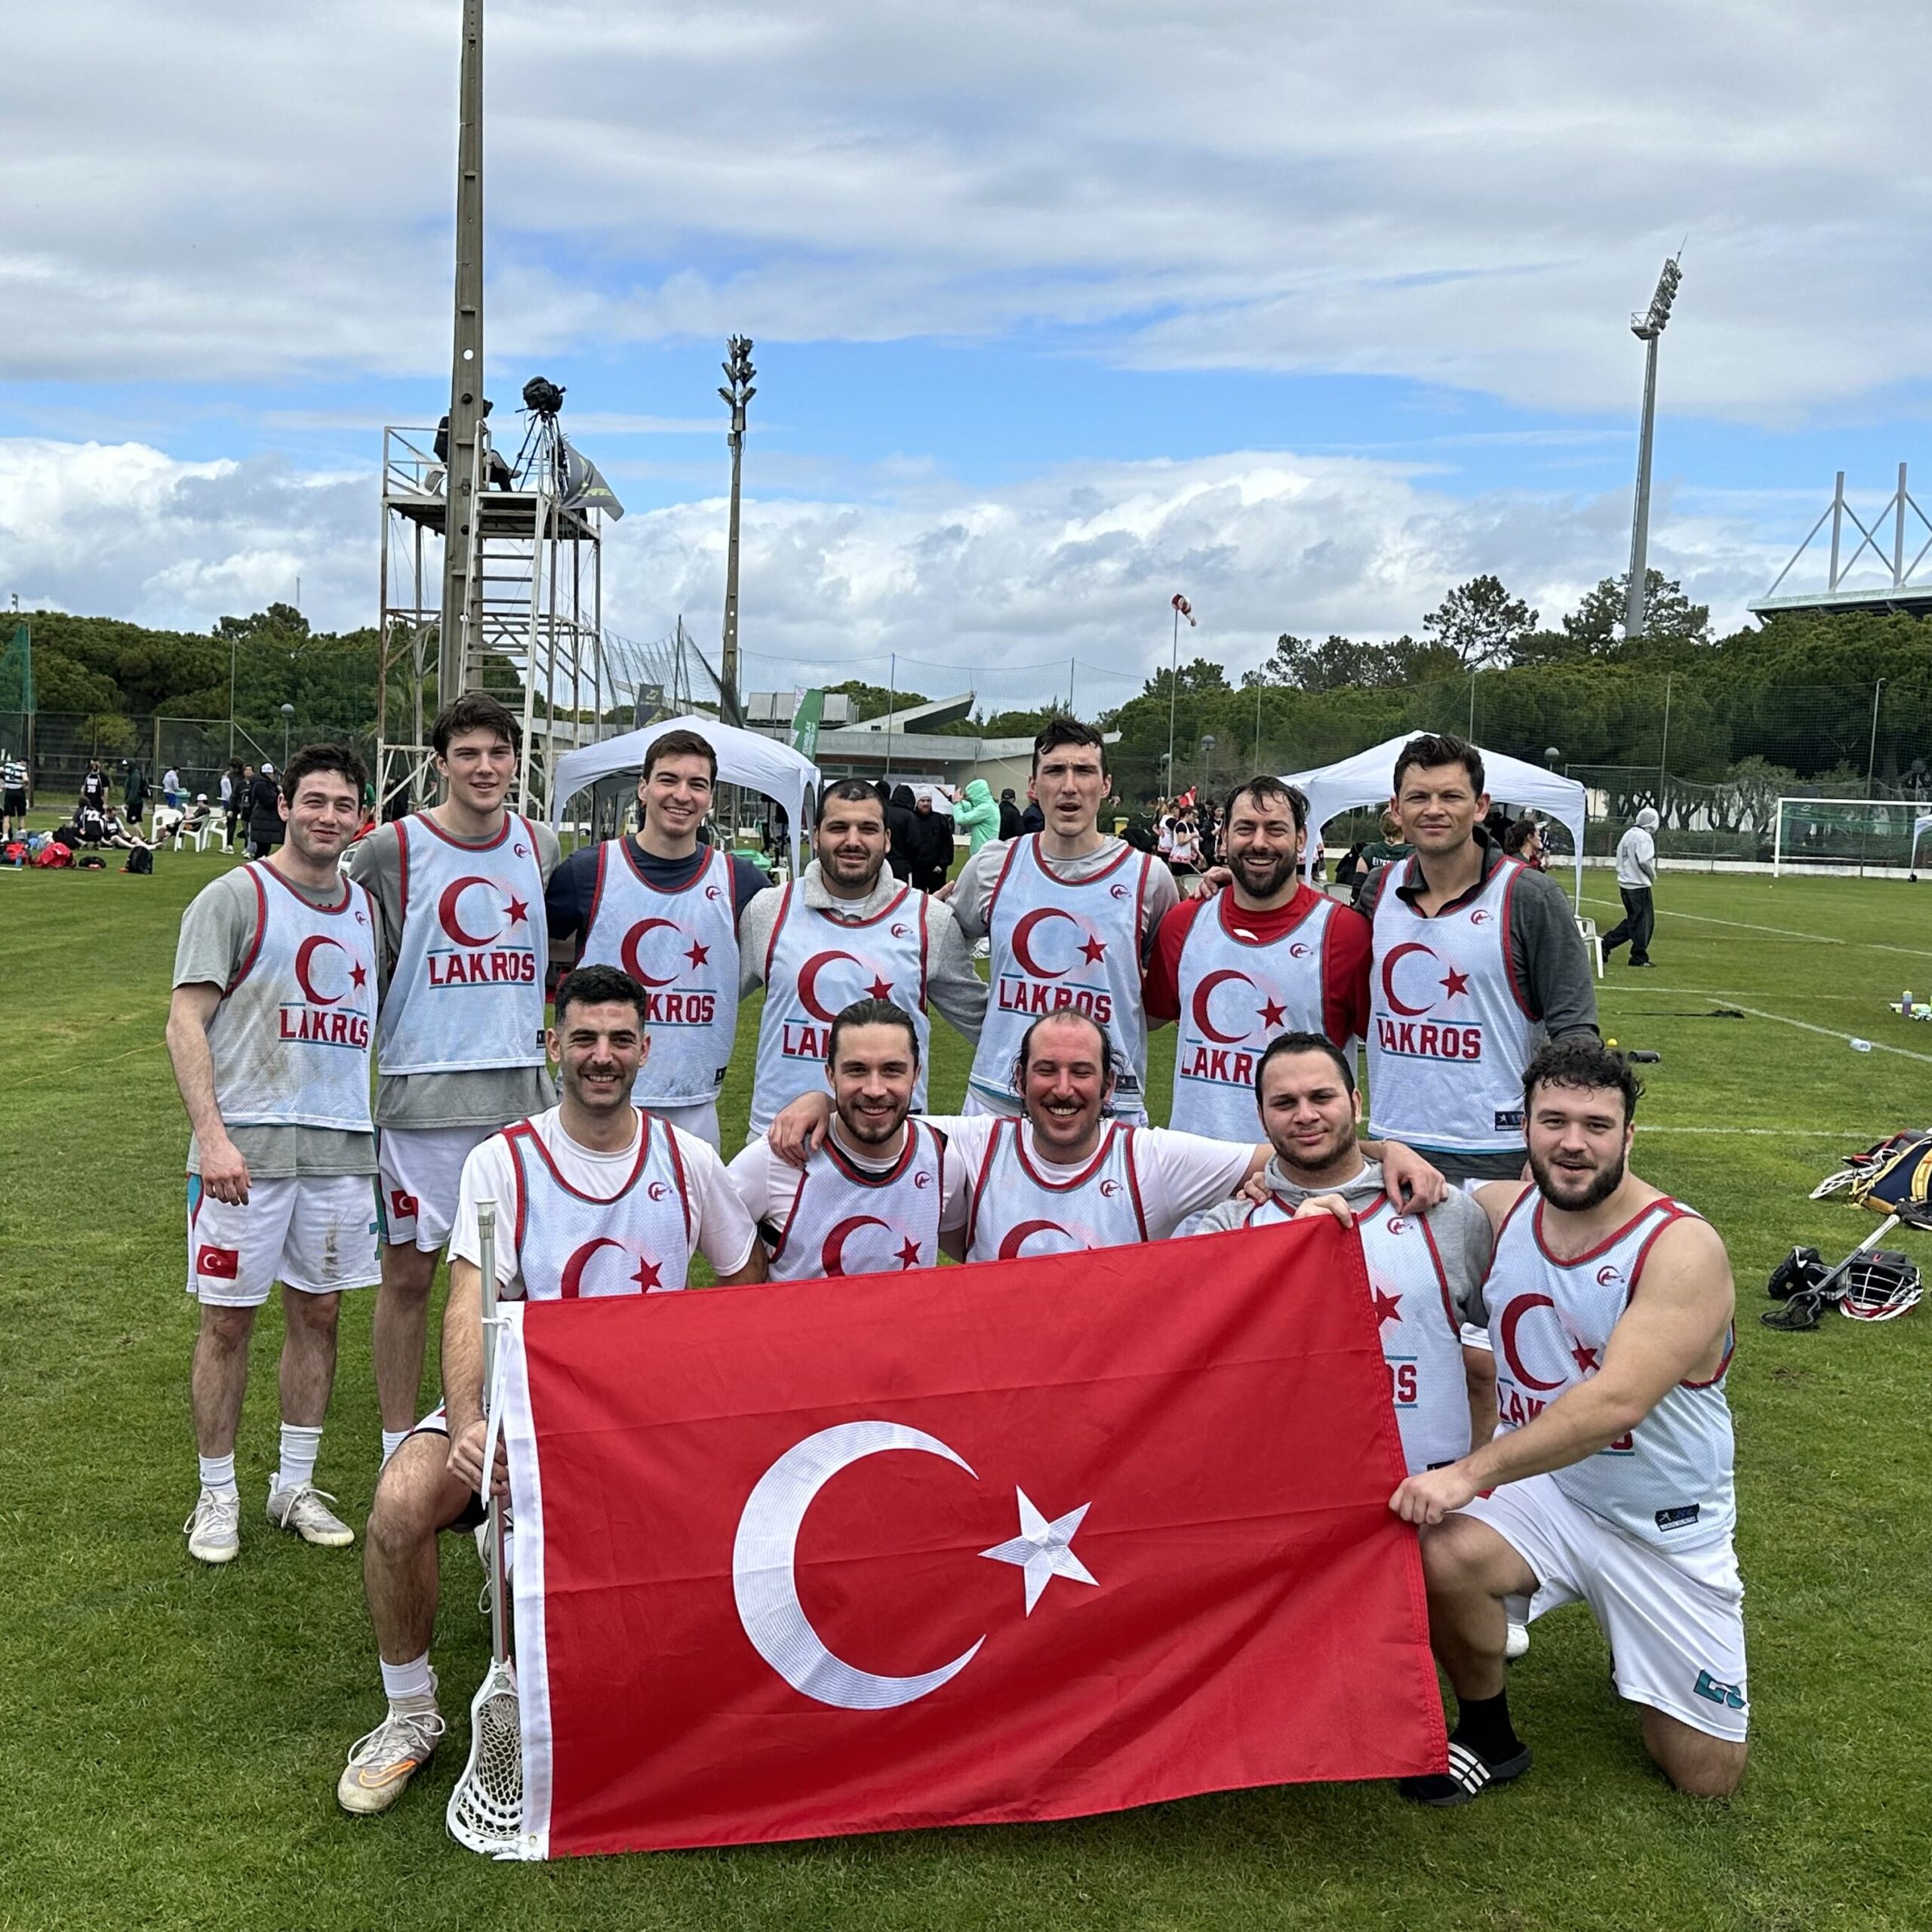 Turkish National Team Beats World Ranked Top 10 for First Time in Program History